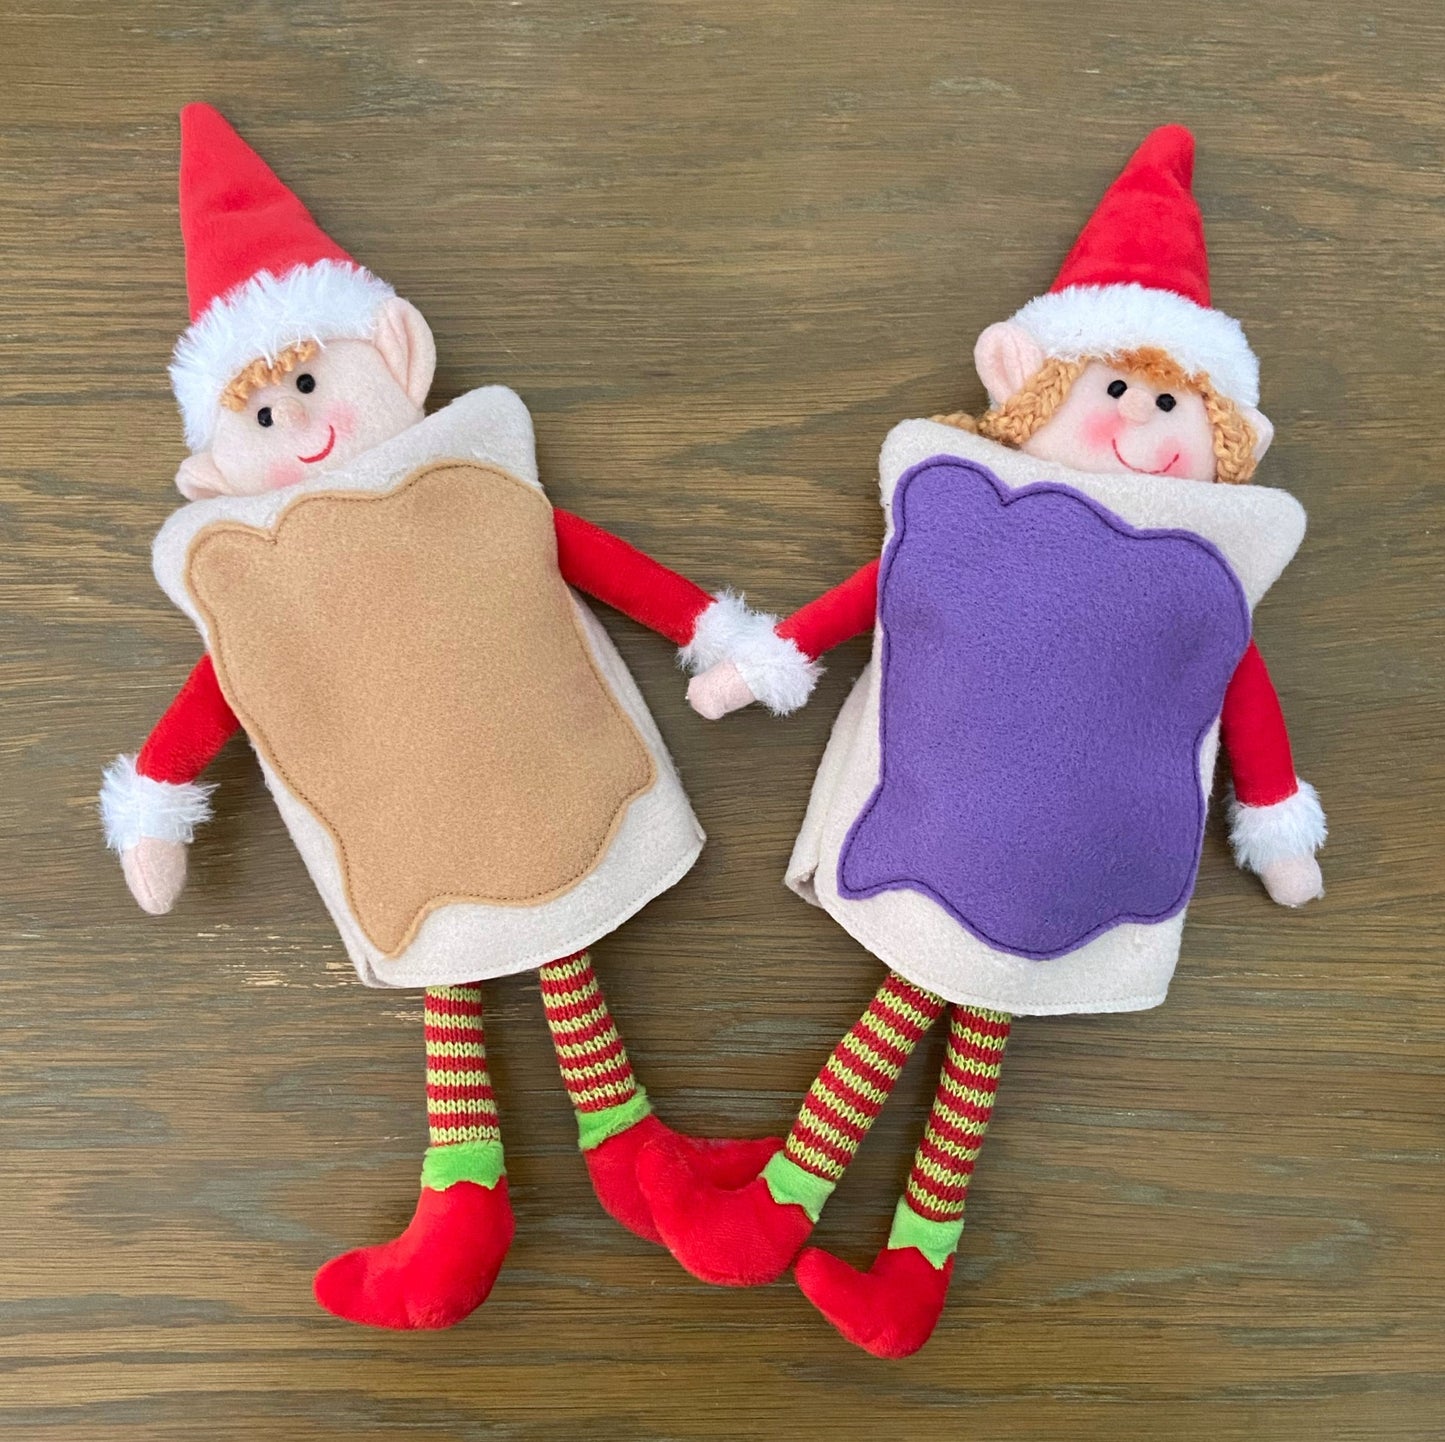 Peanut Butter and Jelly Elf Costume Set